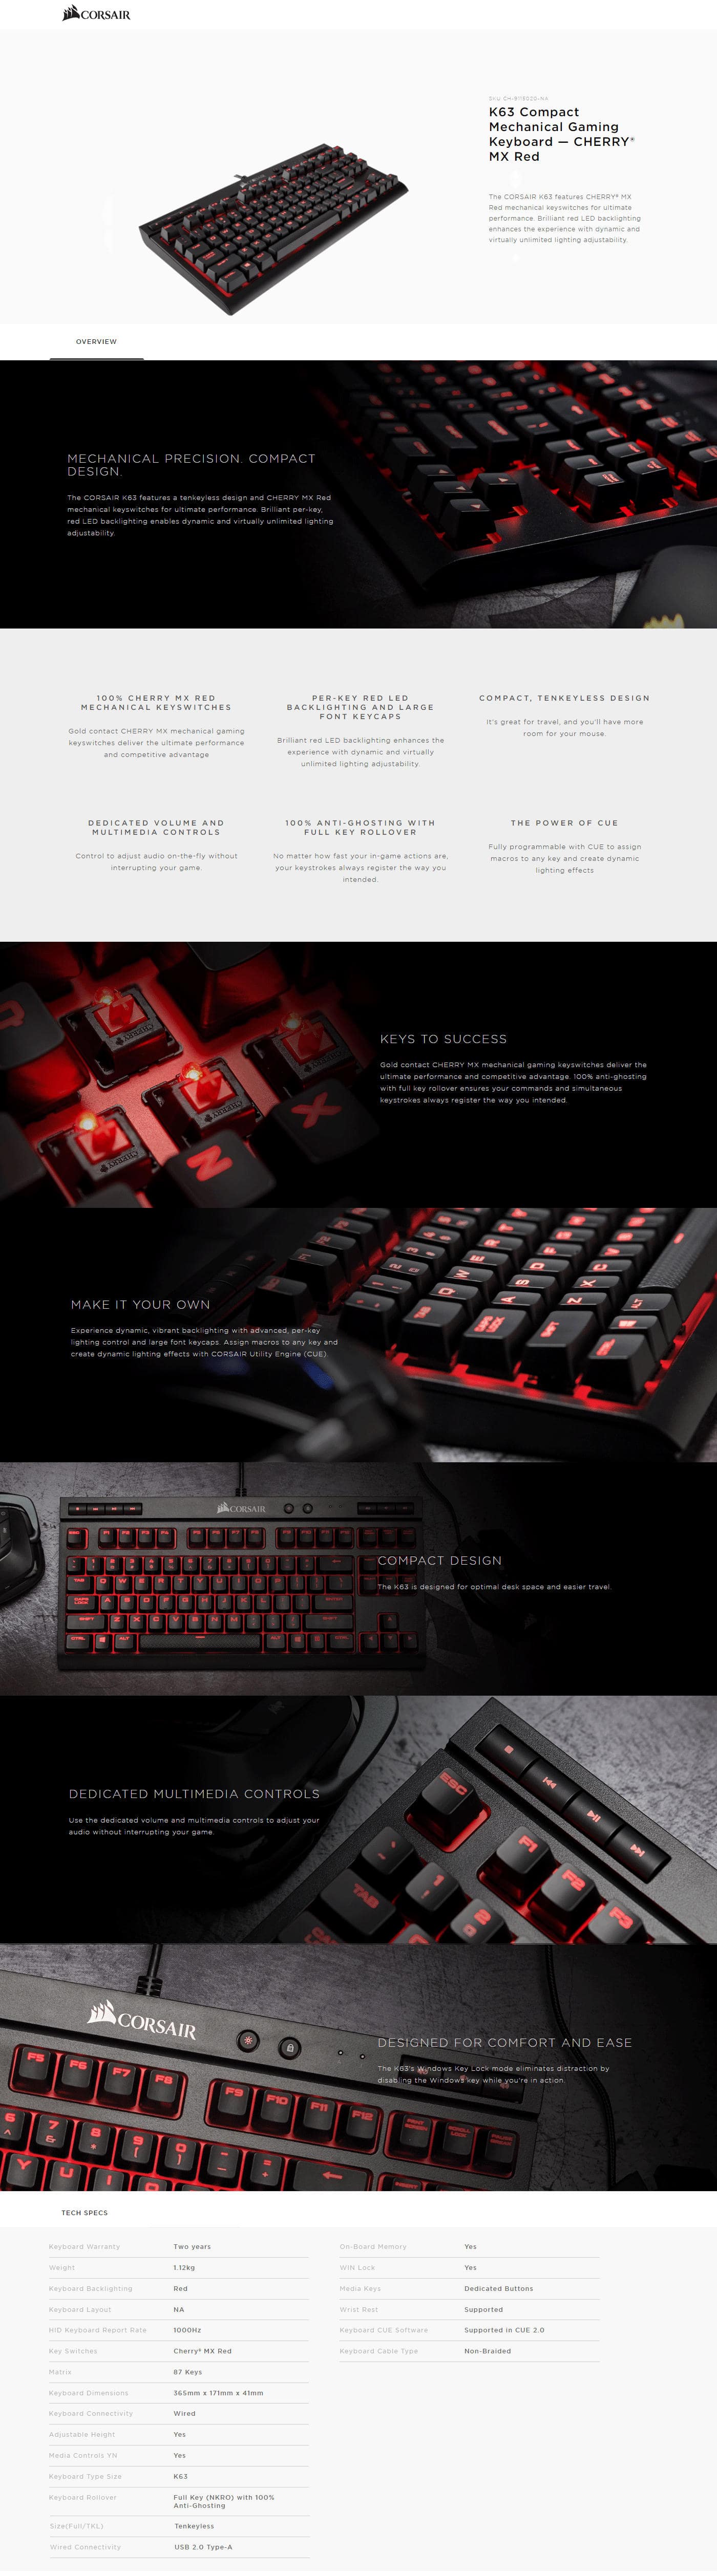  Buy Online Corsair K63 Compact Mechanical Gaming Keyboard - Cherry MX Red (CH-9115020-NA)